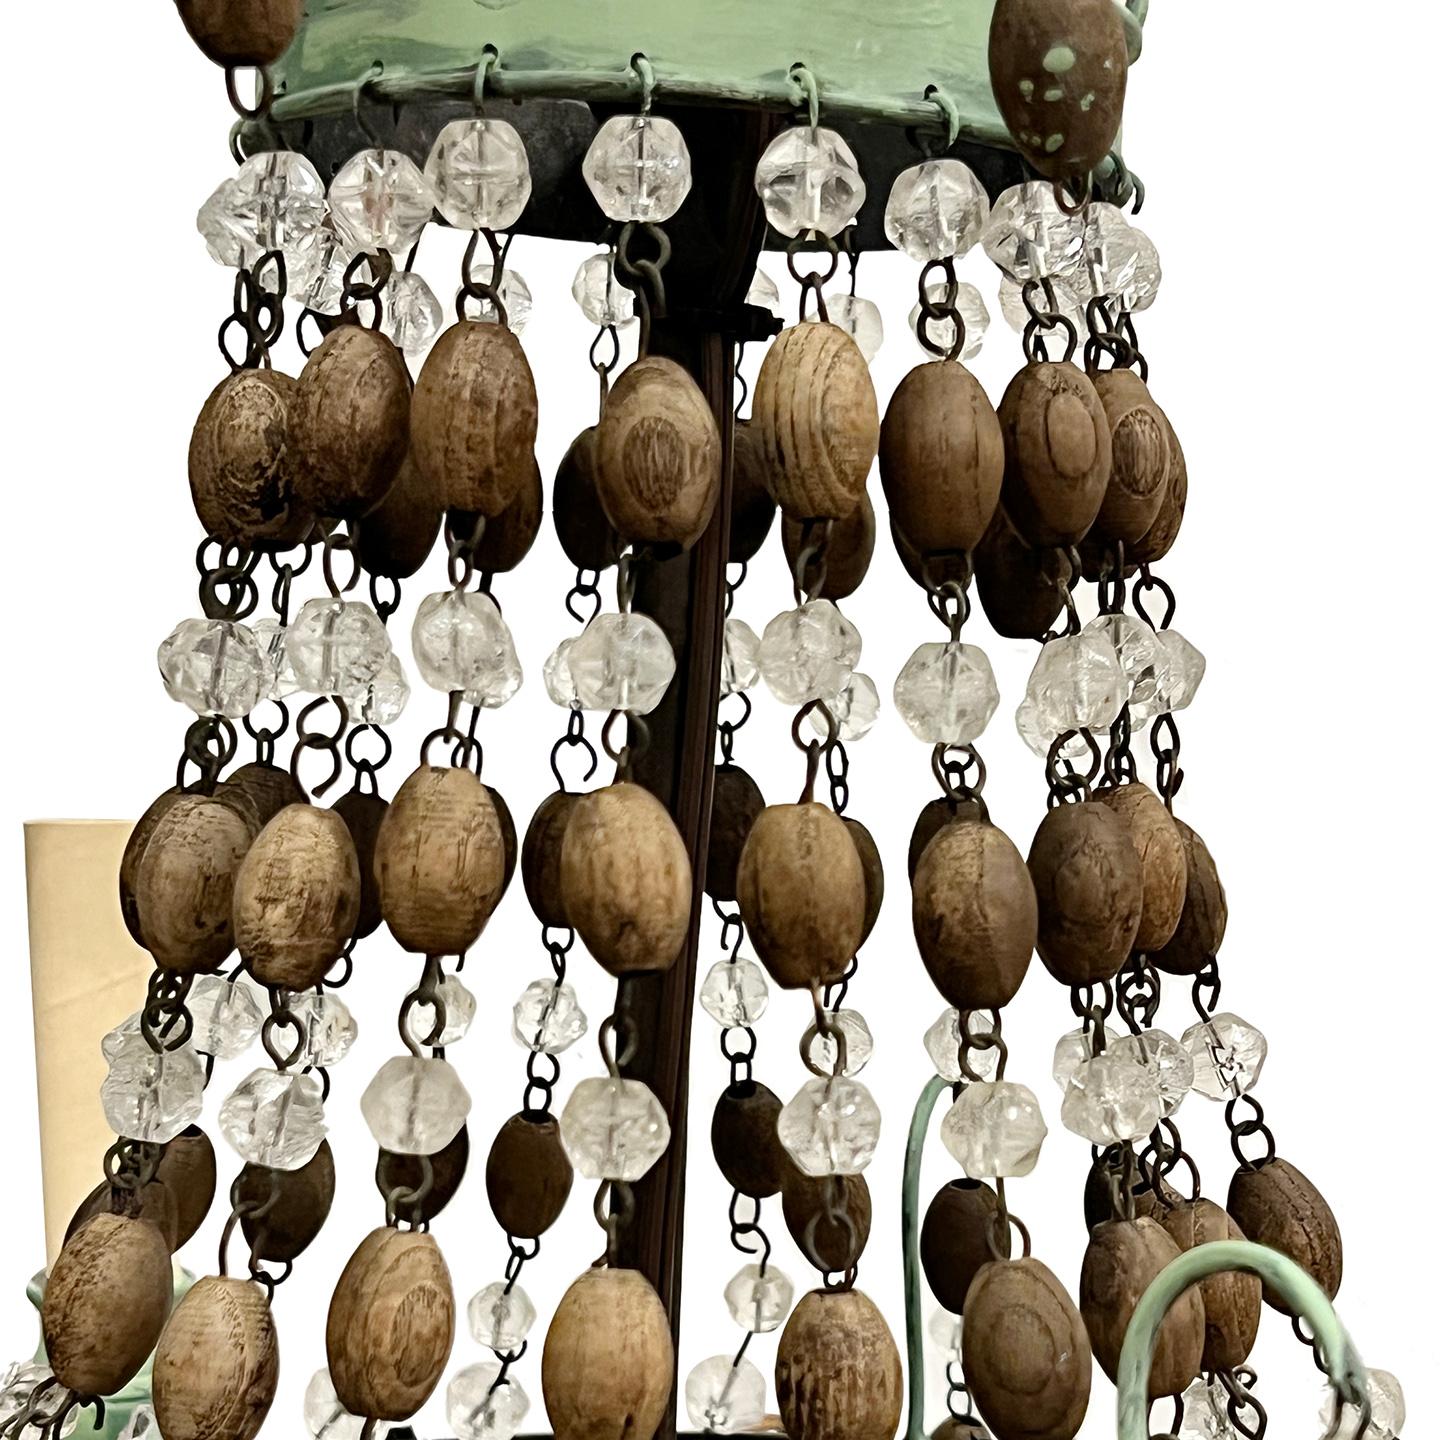 A circa 1950's Italian nine-light painted tole and wood bead chandelier with original patina.

Measurements:
Drop: 25